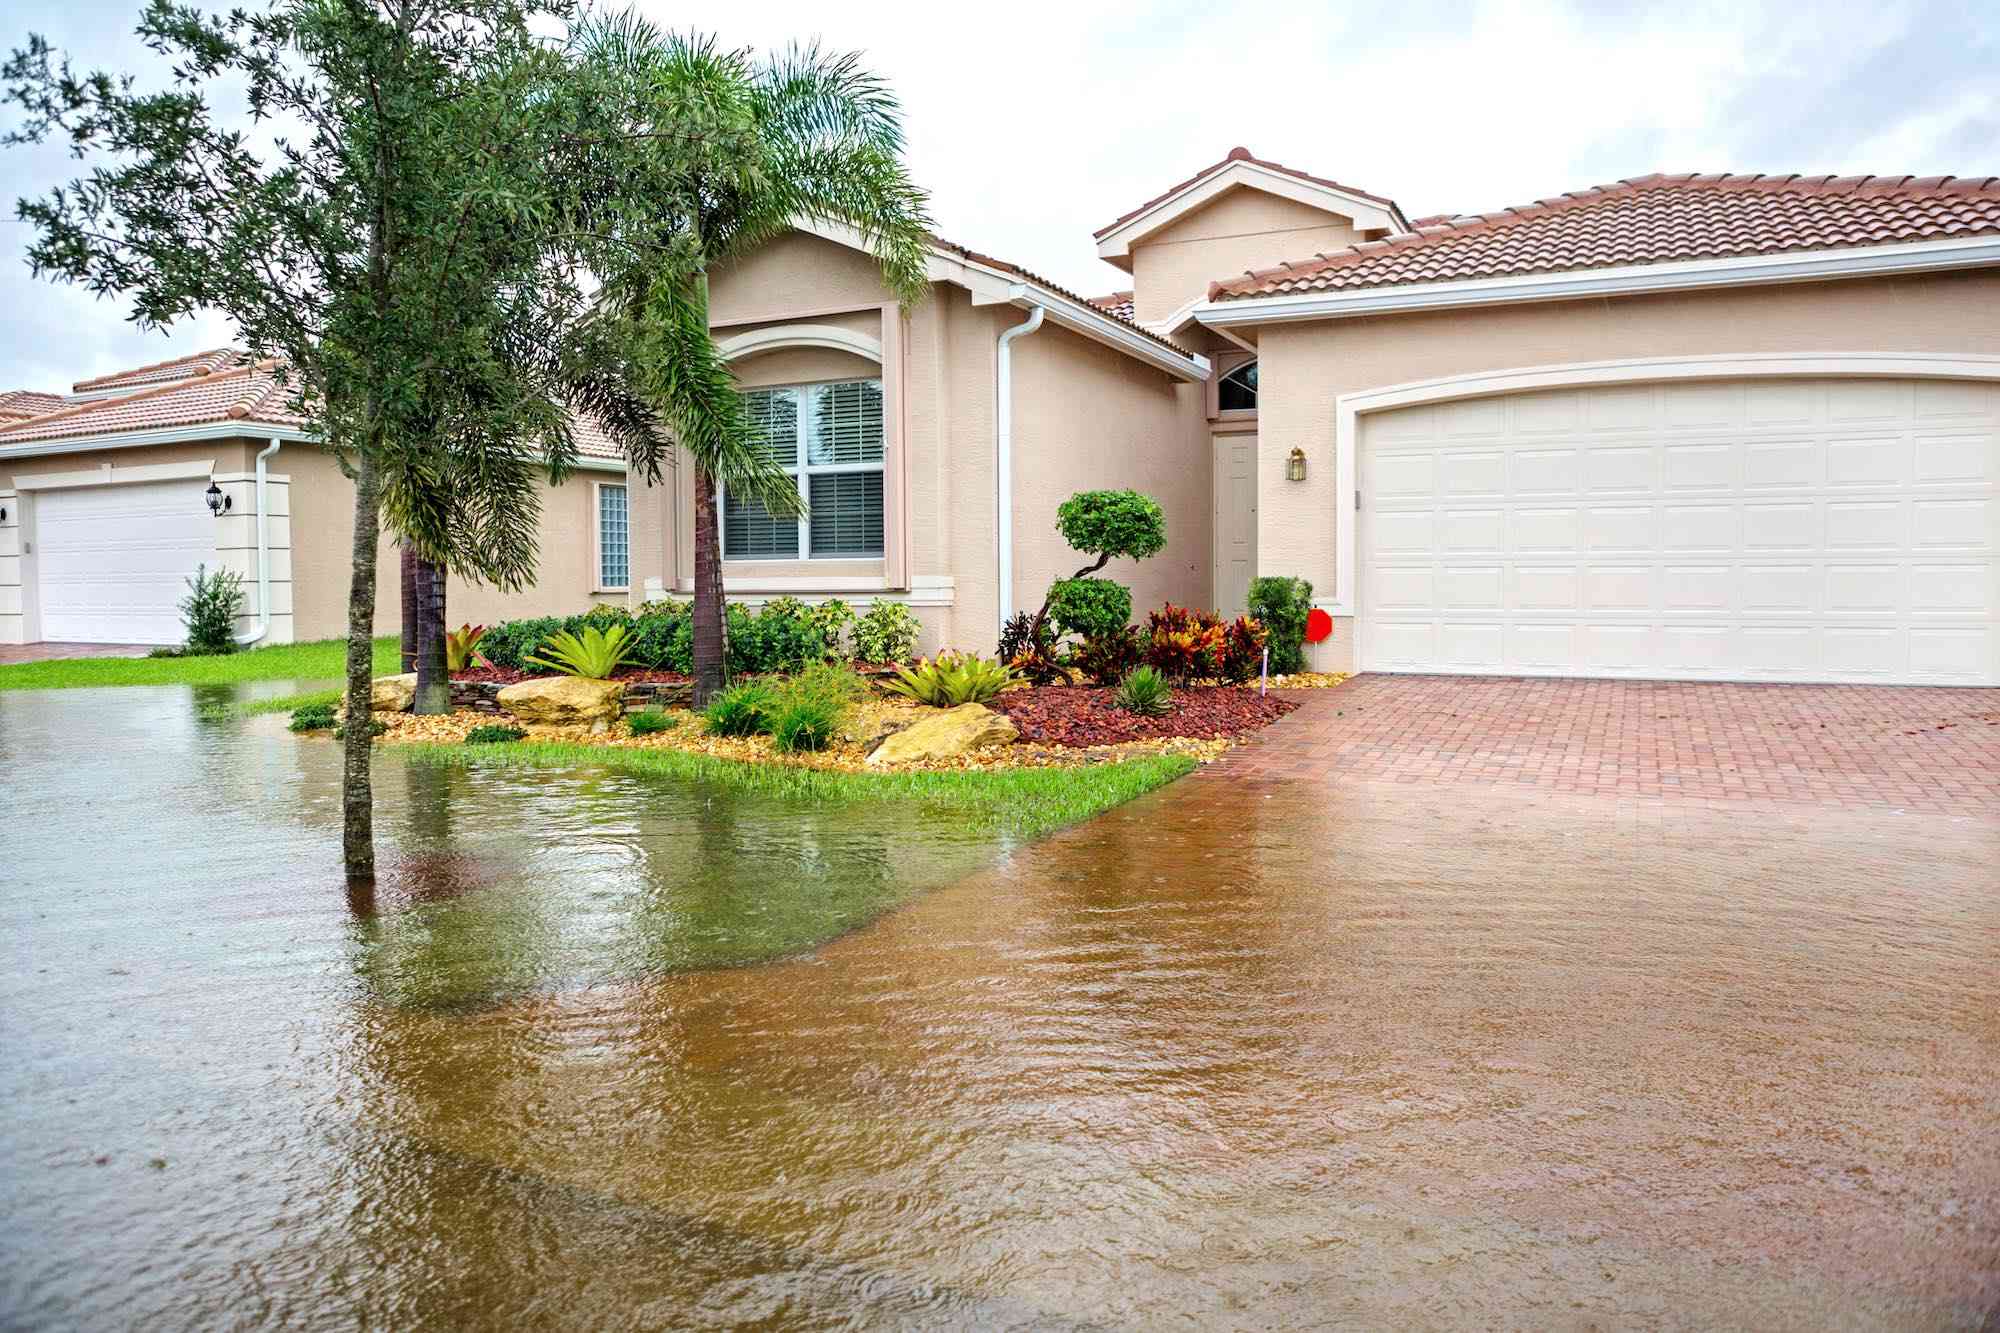 How To Stop Flooding In Backyard